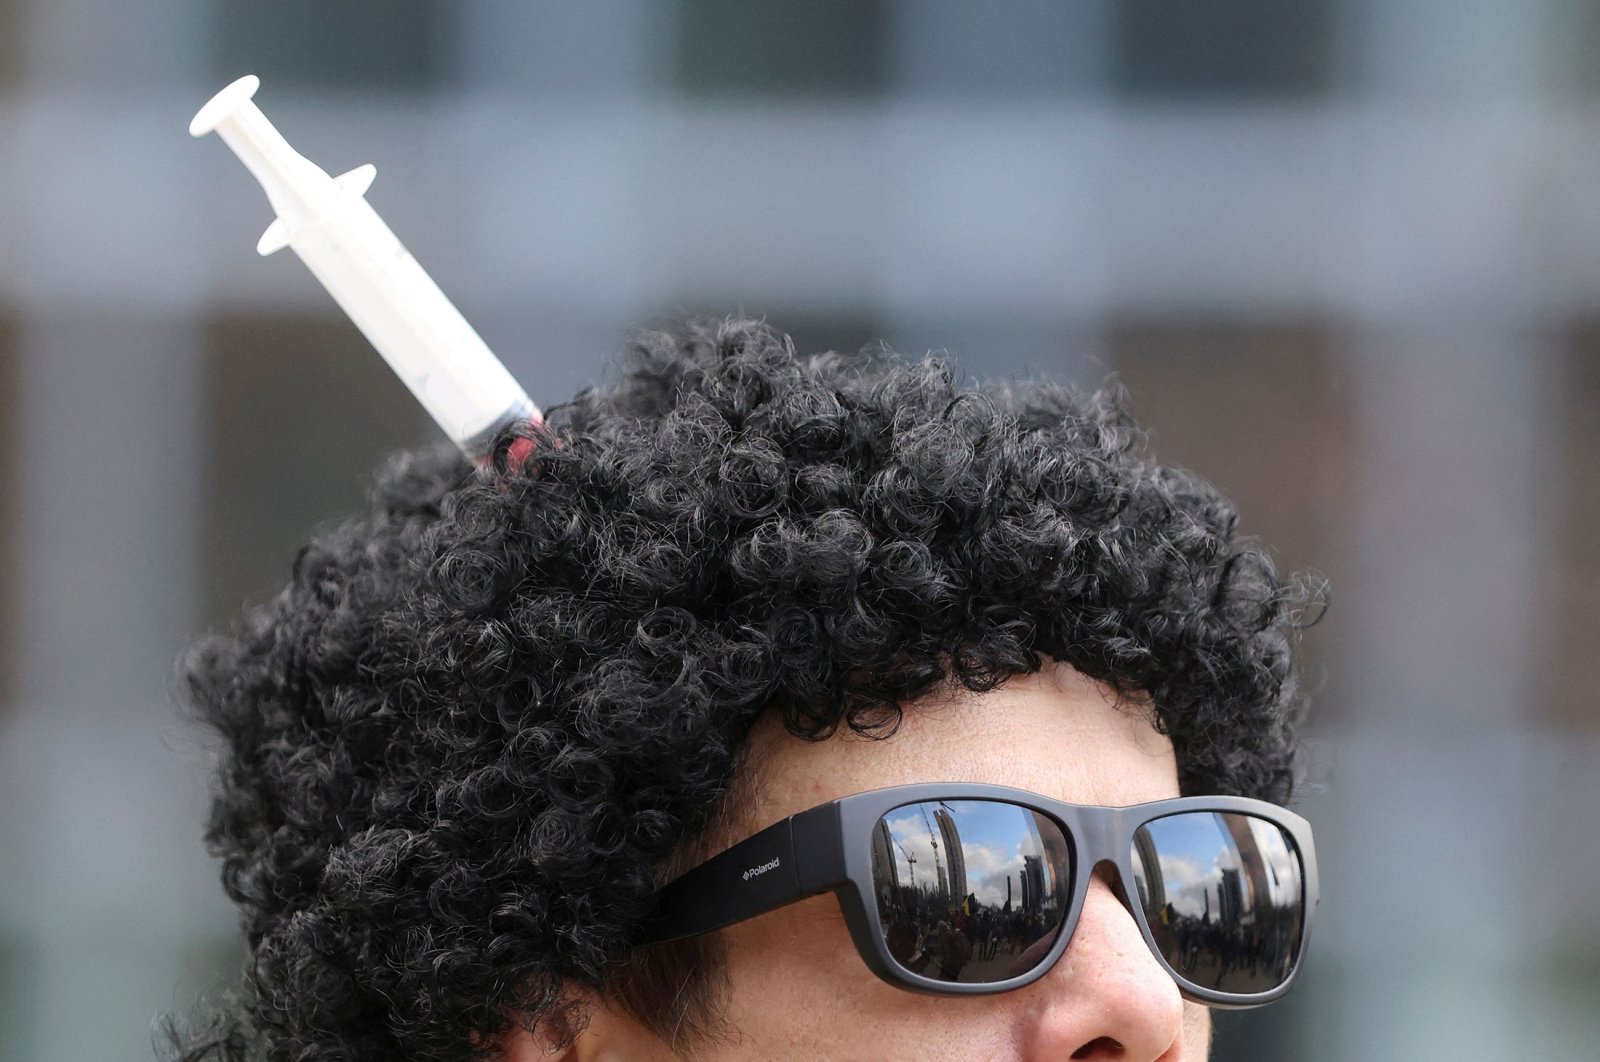 A man wearing a wig with a syringe in it takes part in a demonstration asking for the impeachment of Belgium&#039;s government after restrictions imposed to contain the spread of COVID-19, Brussels, Belgium, Jan. 30, 2022. (Reuters Photo)